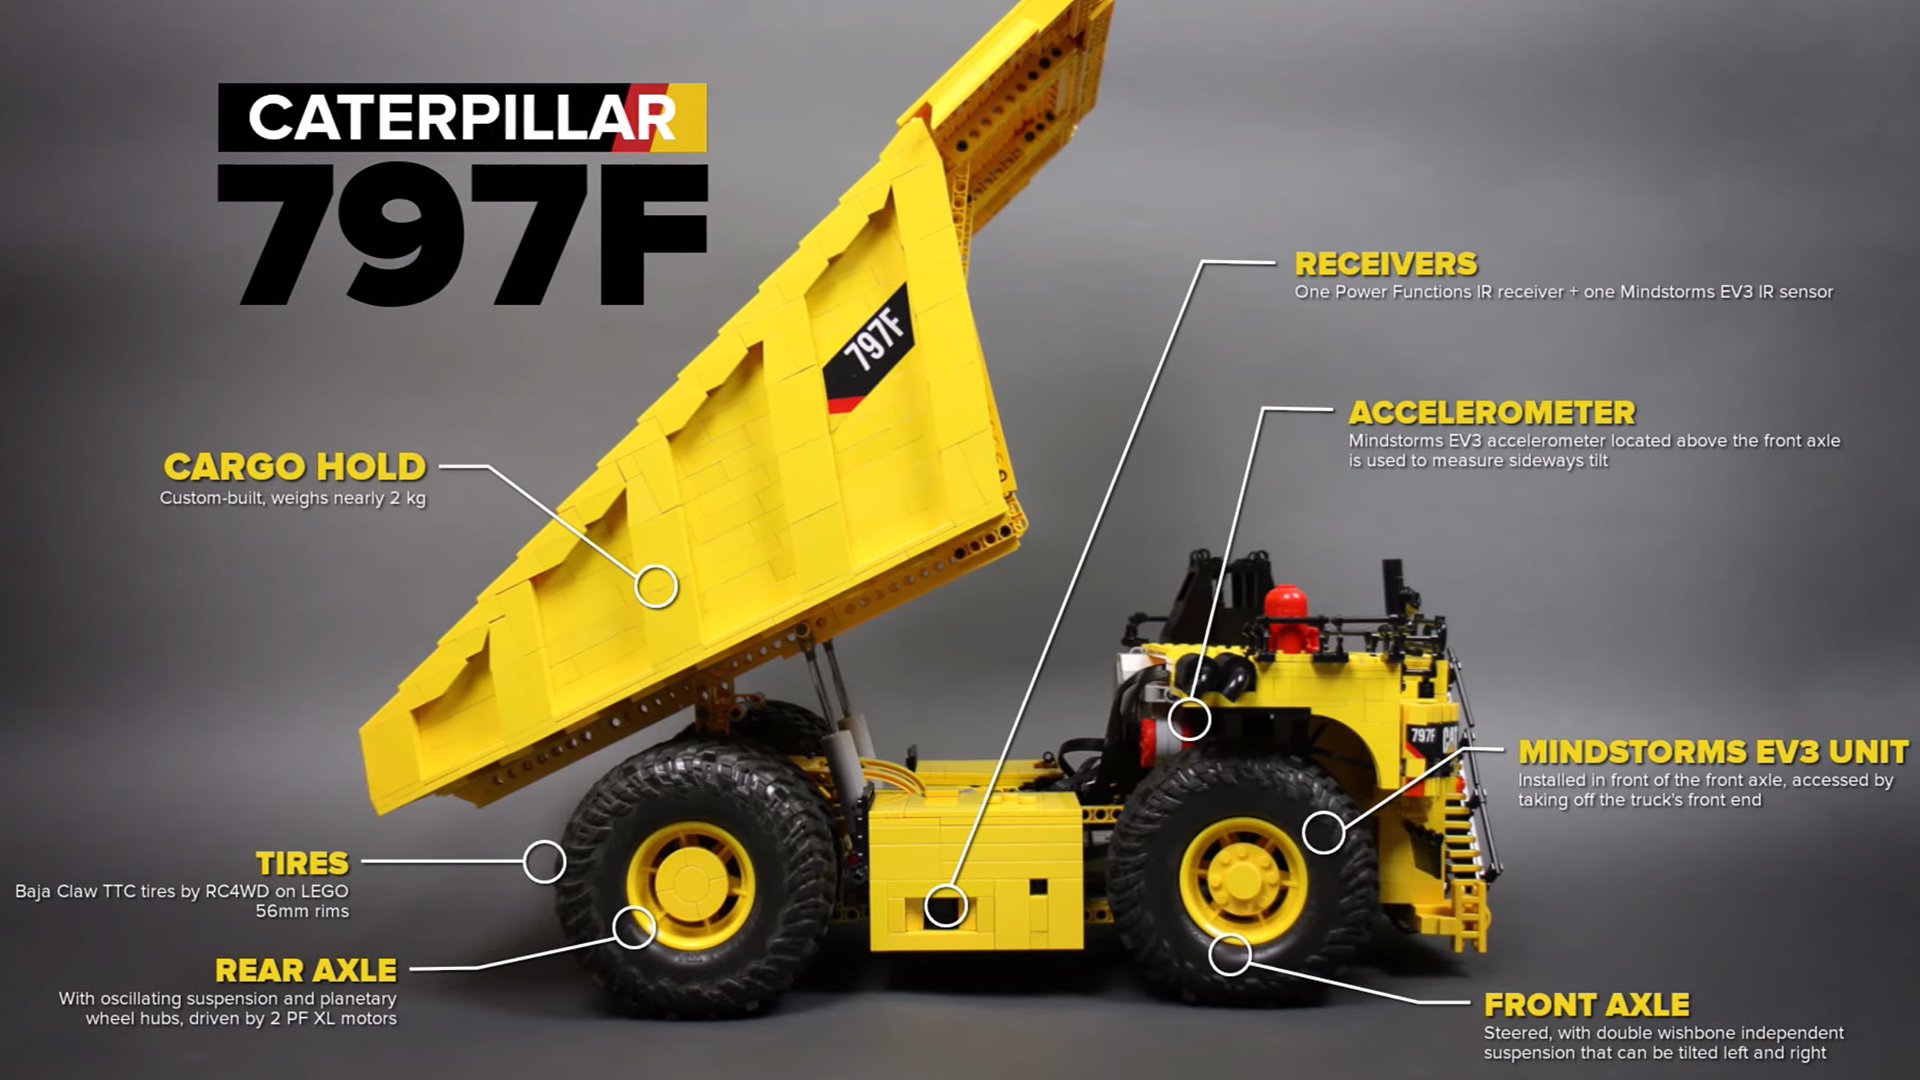 This LEGO Scale Model of the Caterpillar 797F Weighs 9 Pounds